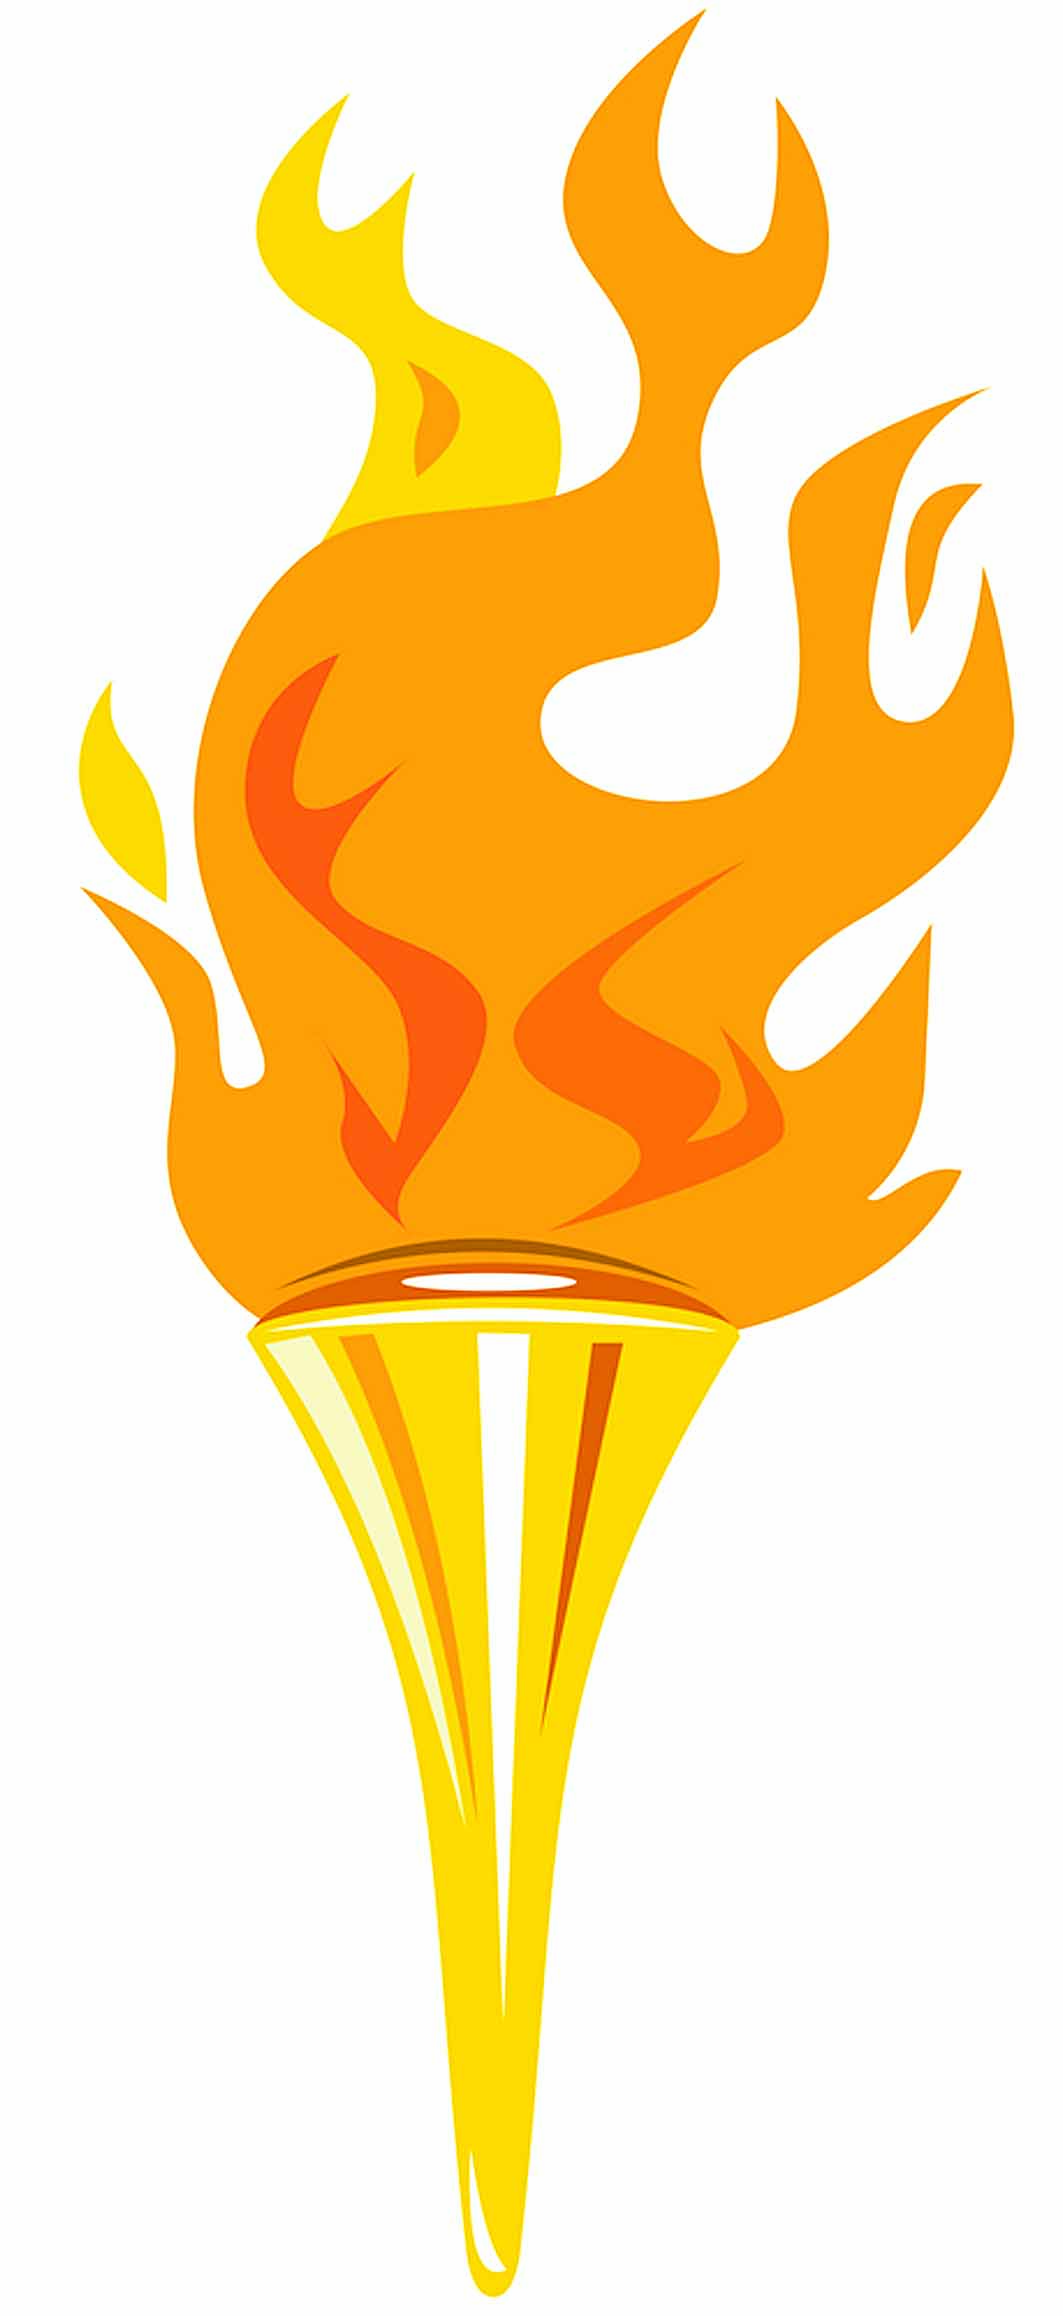 Olympic torch images 2012 clipart